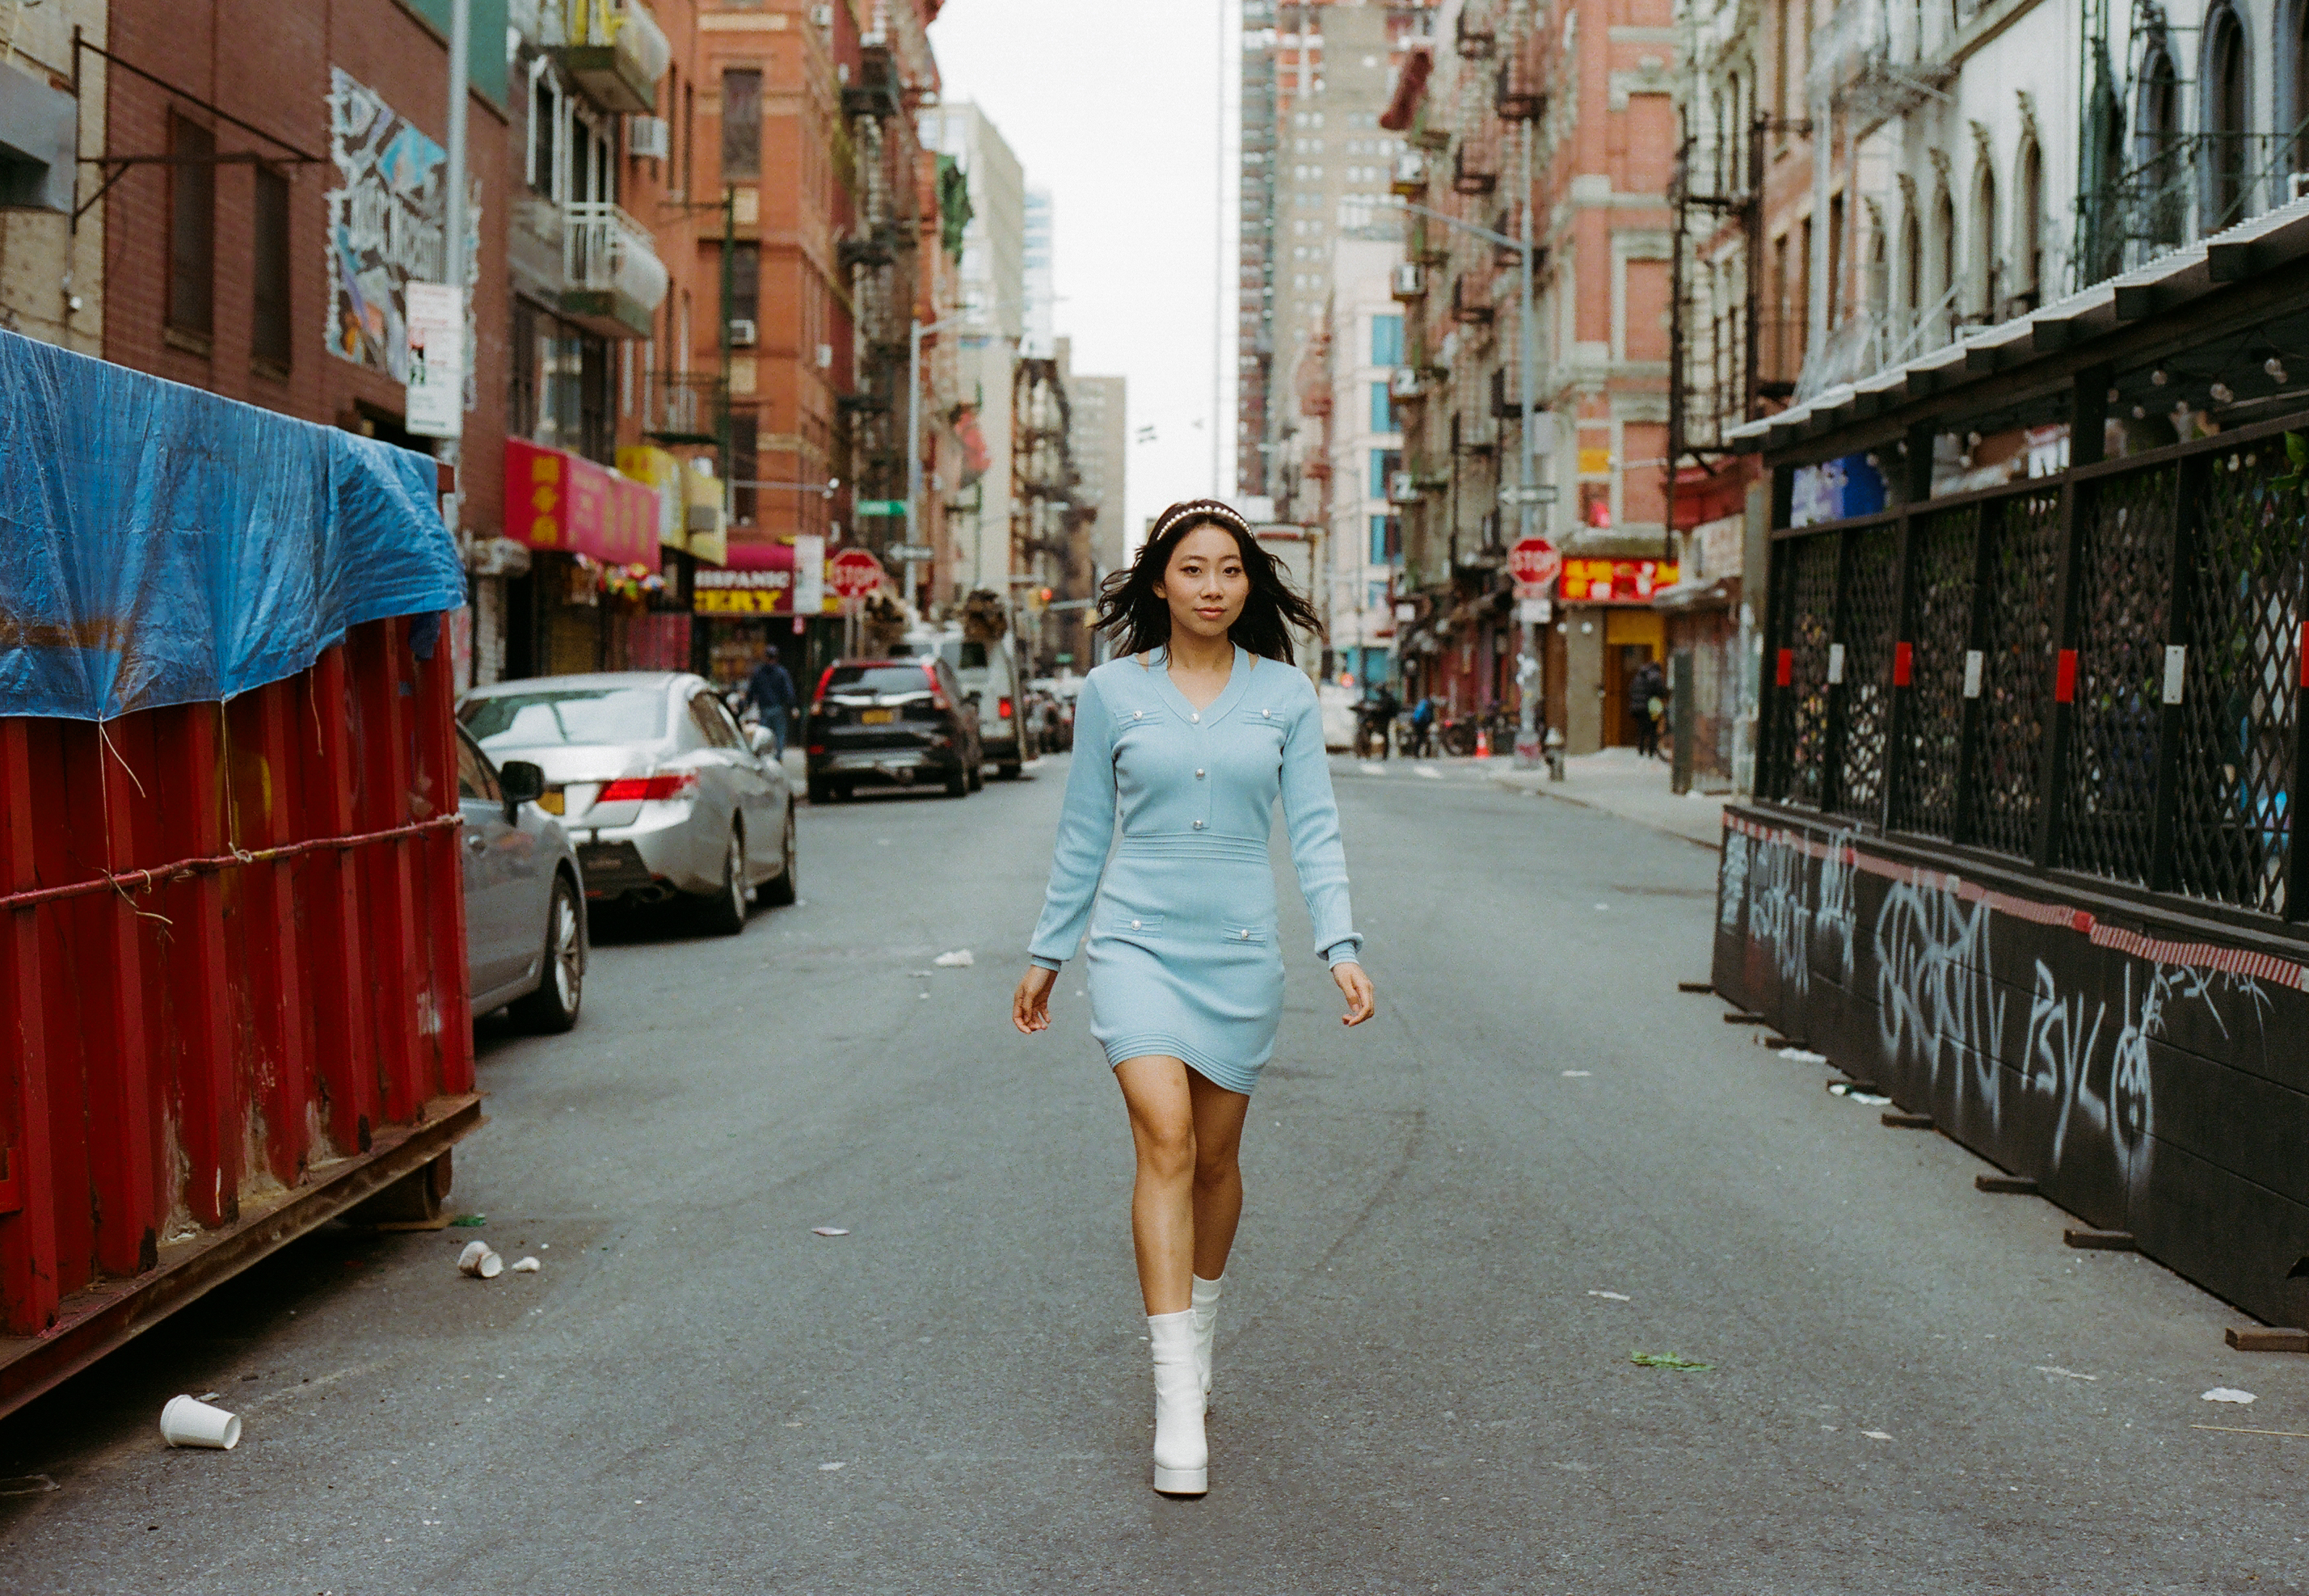 meg wearing a blue dress and white boots walking through new york's chinatown